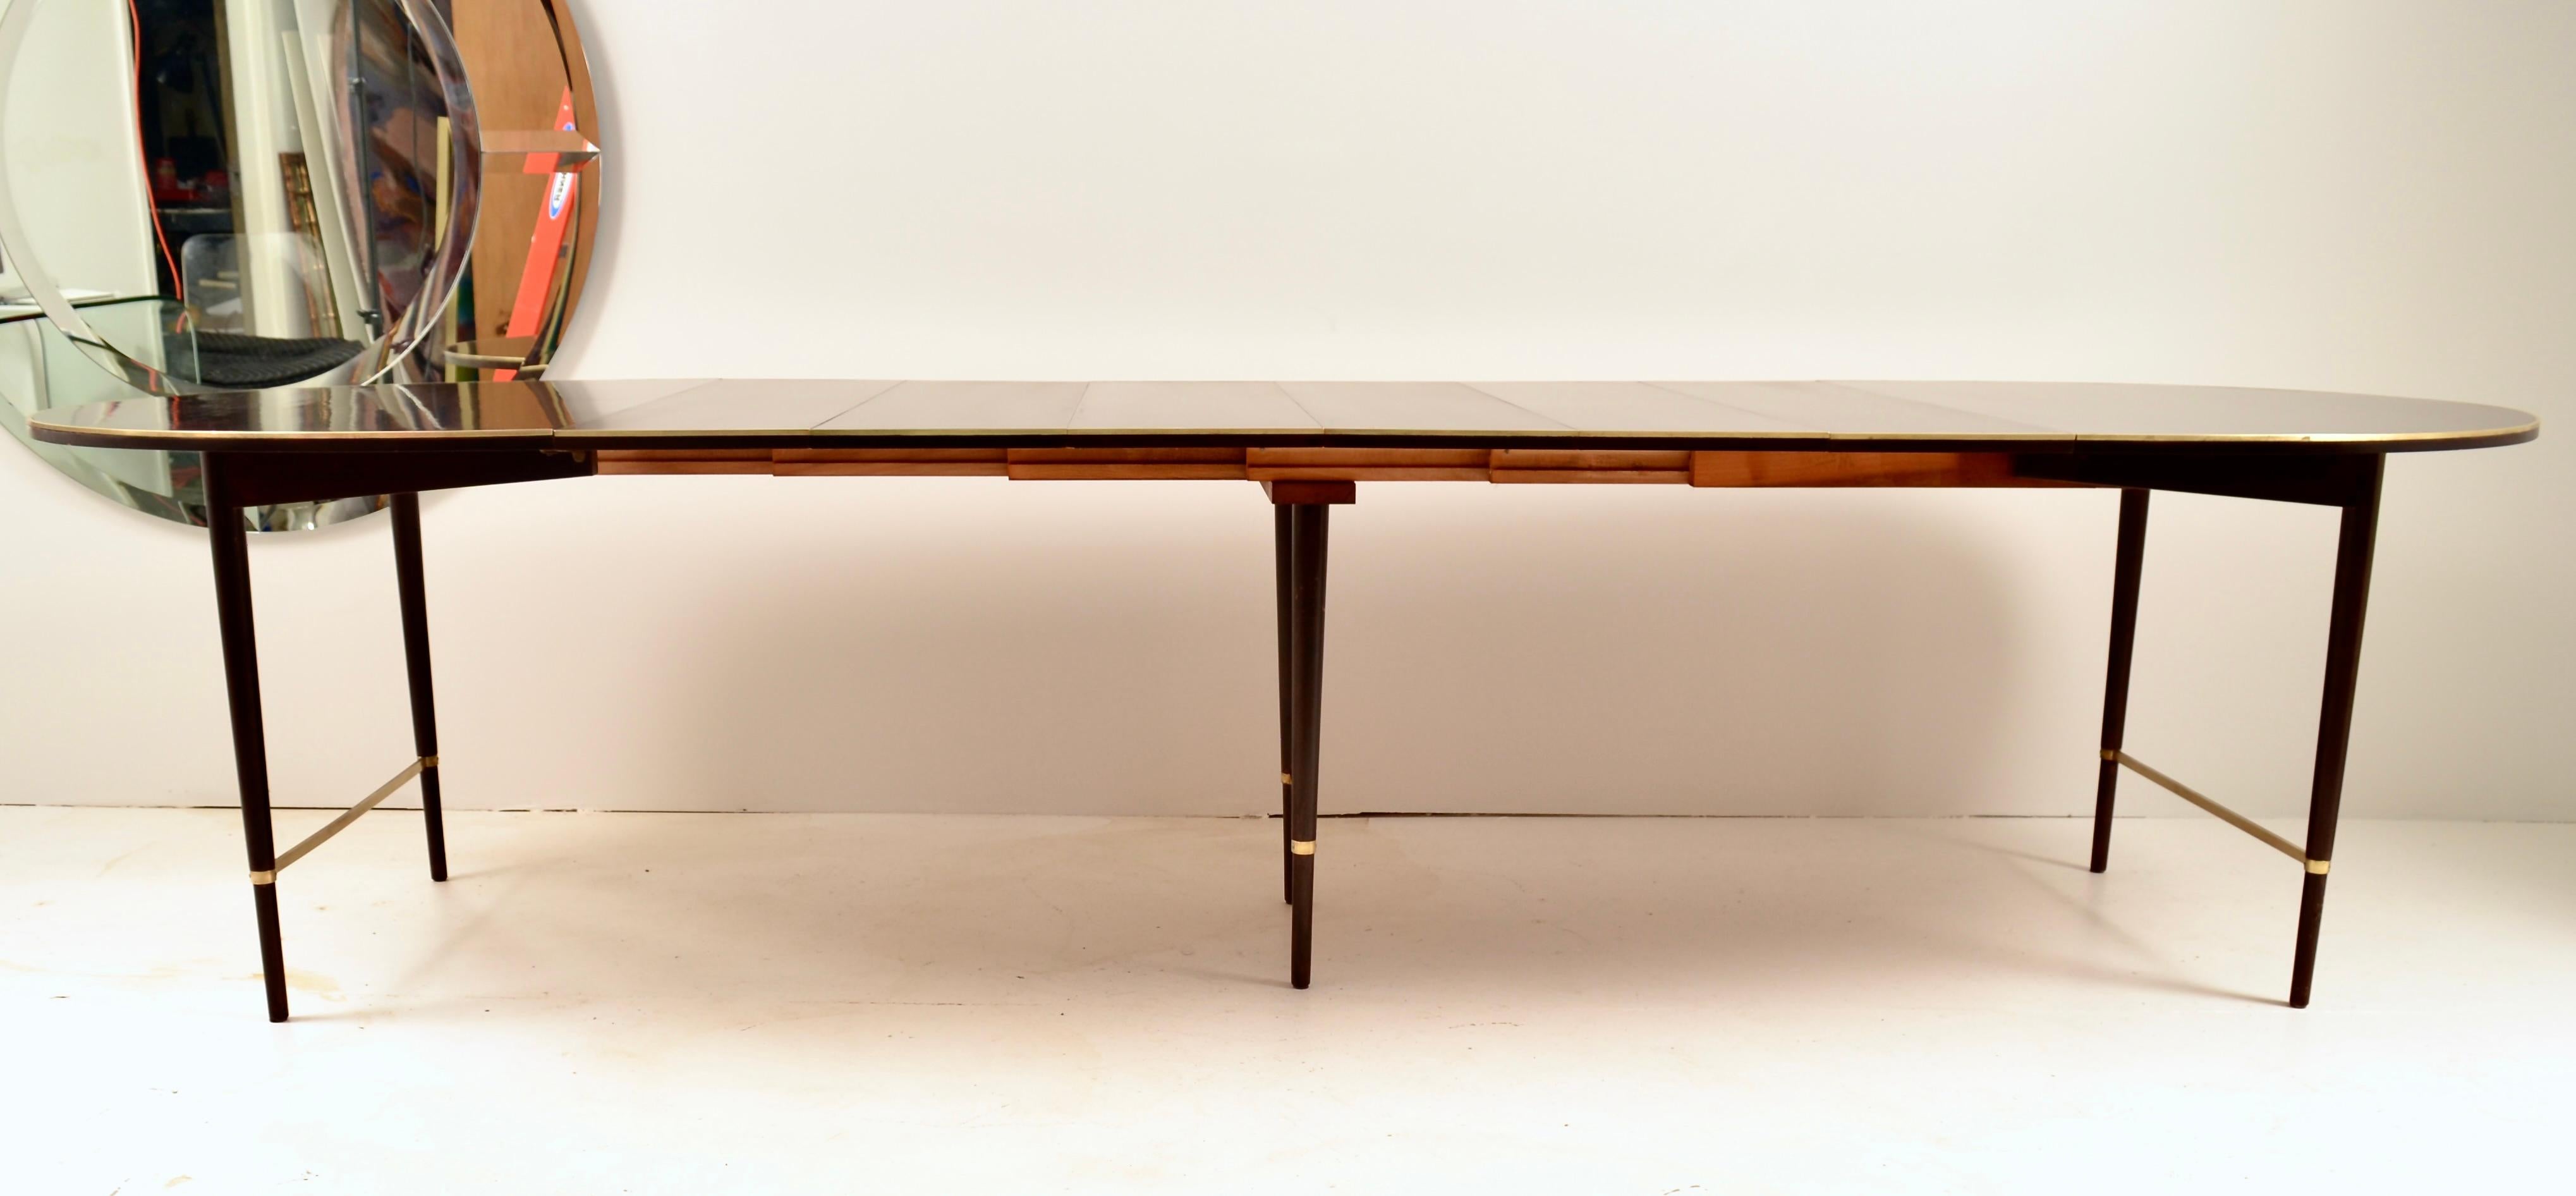 Mid-20th Century Paul McCobb Connoisseur Collection Dining Table, USA c 1950s